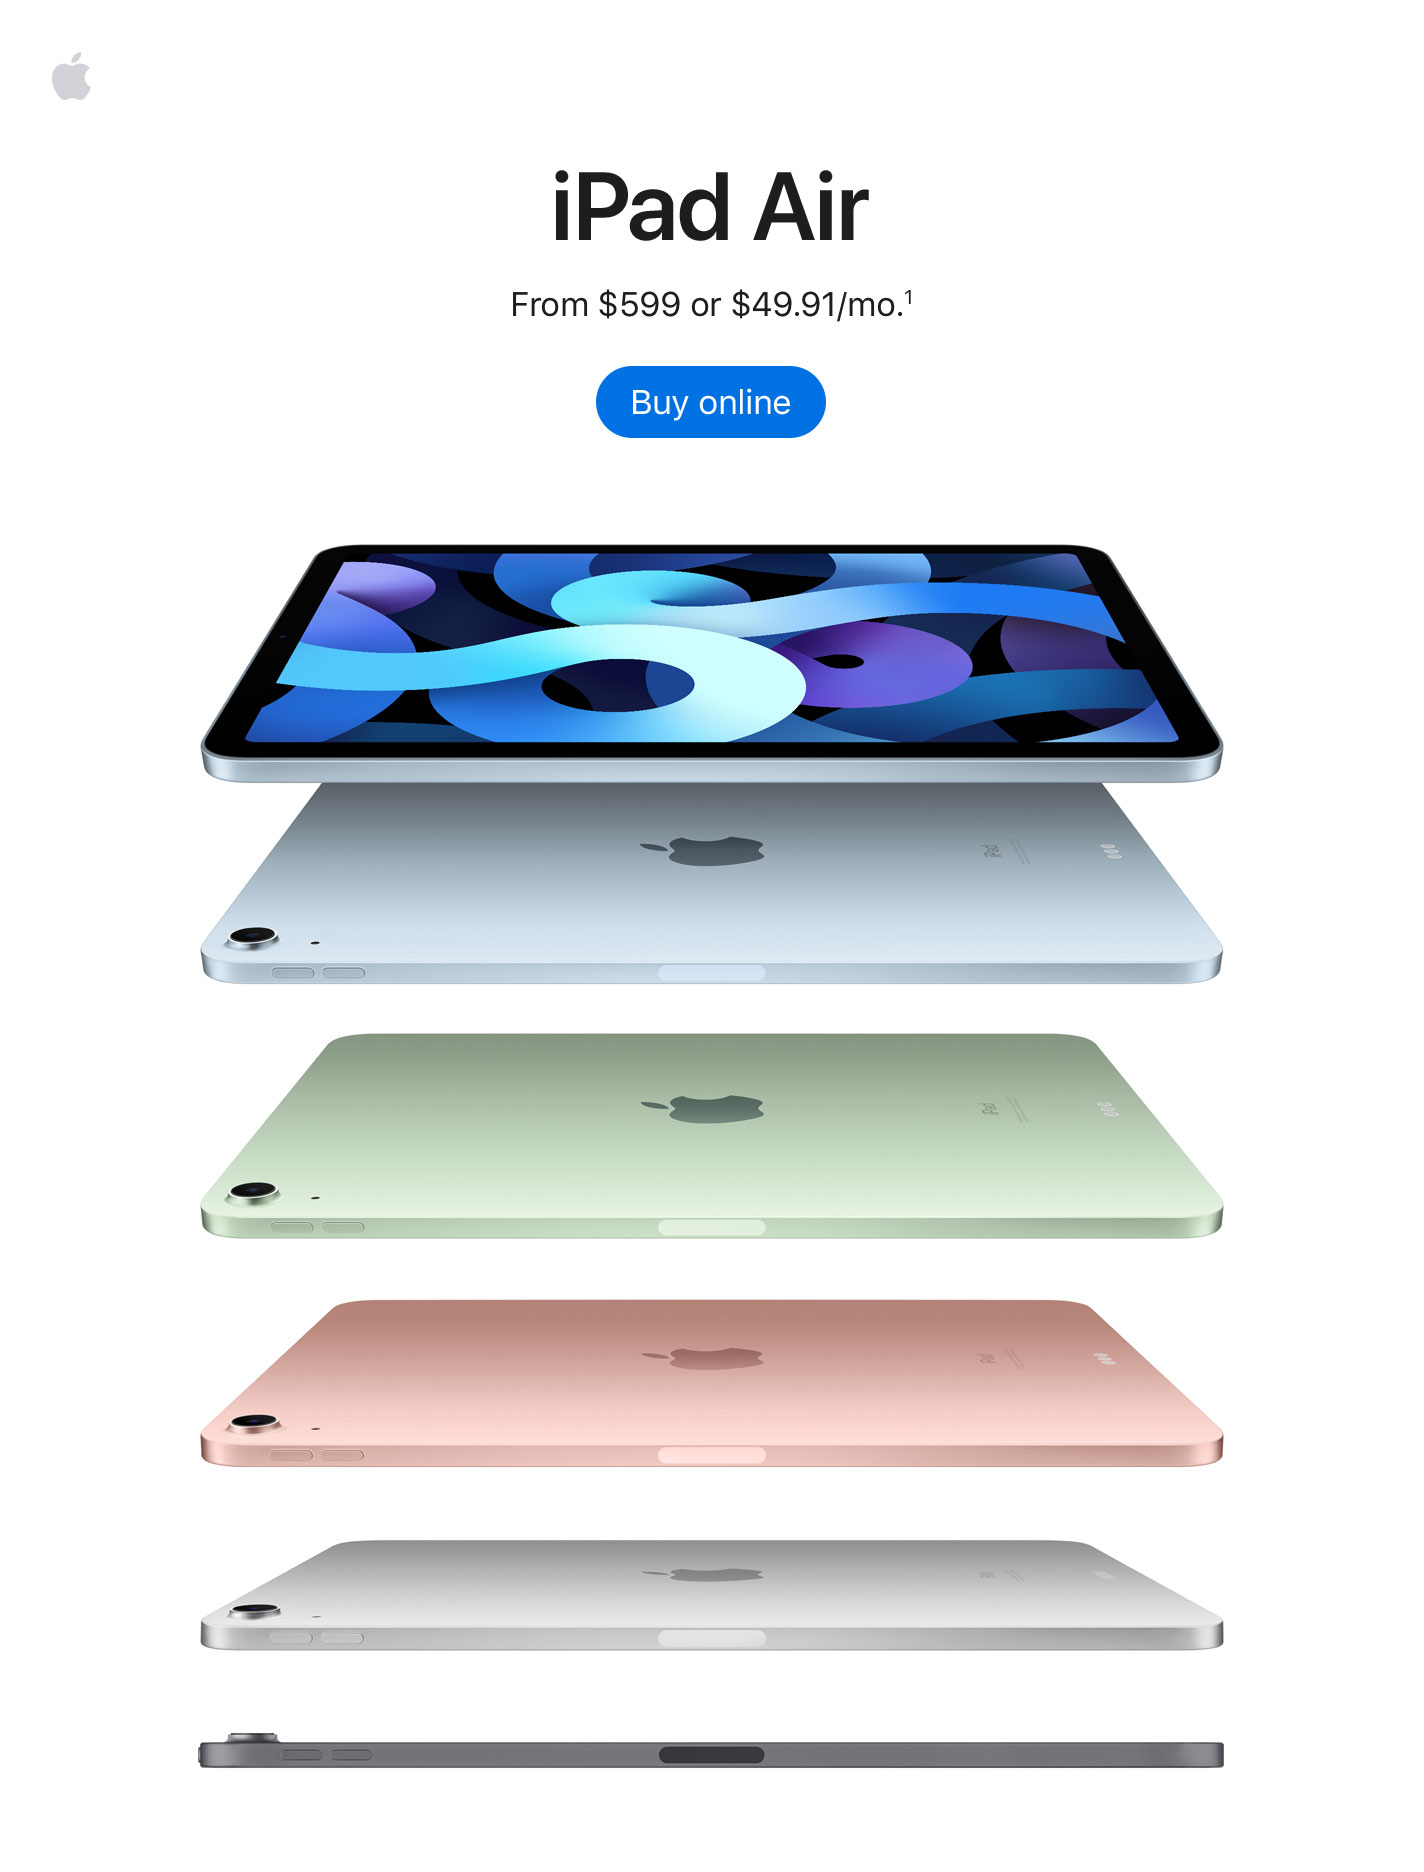 iPad Air From $599 or $49.91/mo.(1) Buy Online